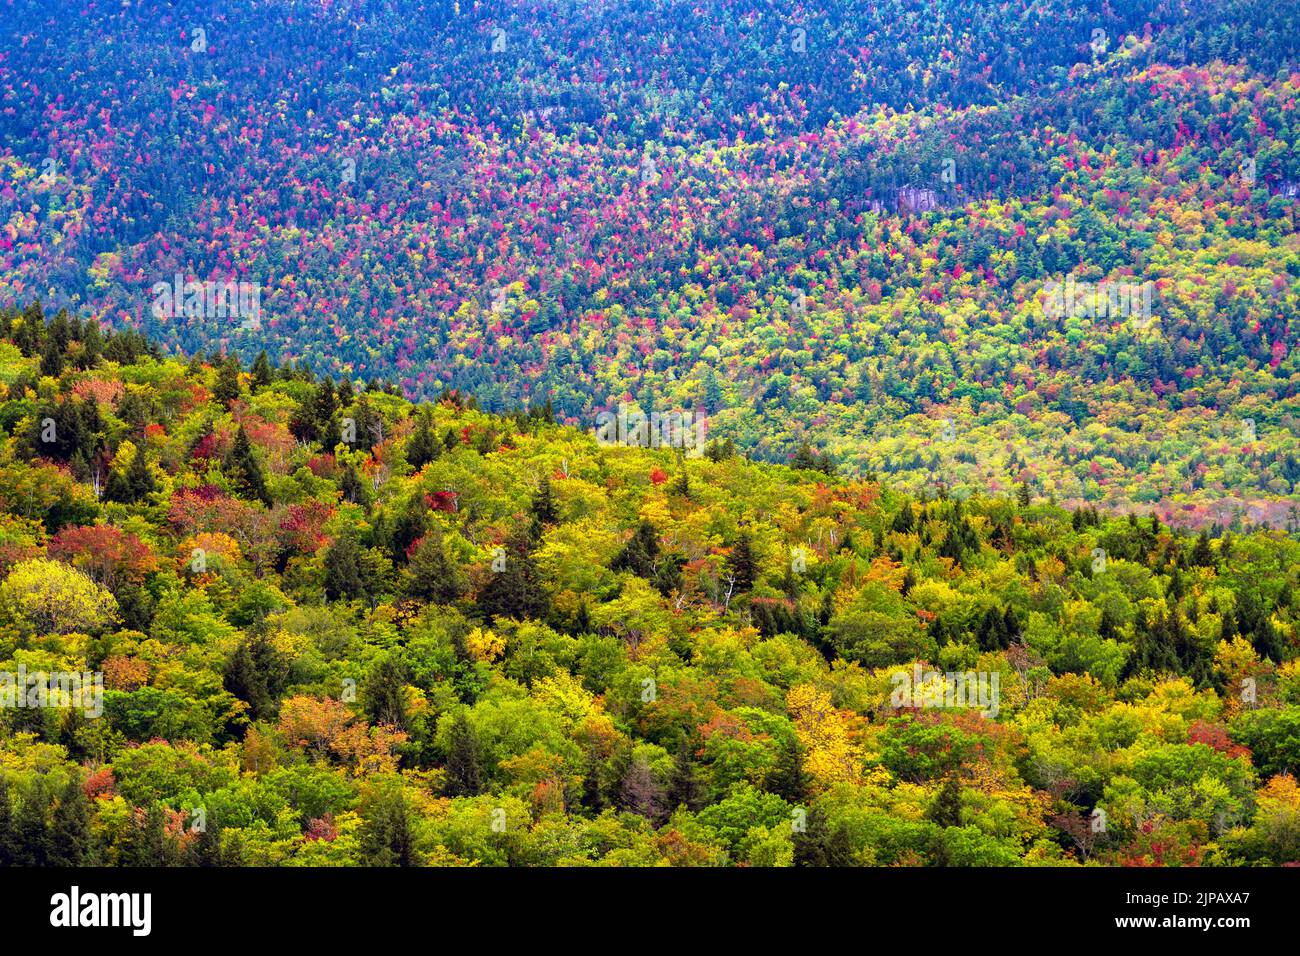 The sides of a mountain are covered with trees in various stages of changing colors during autumn in New Hampshire. Stock Photo